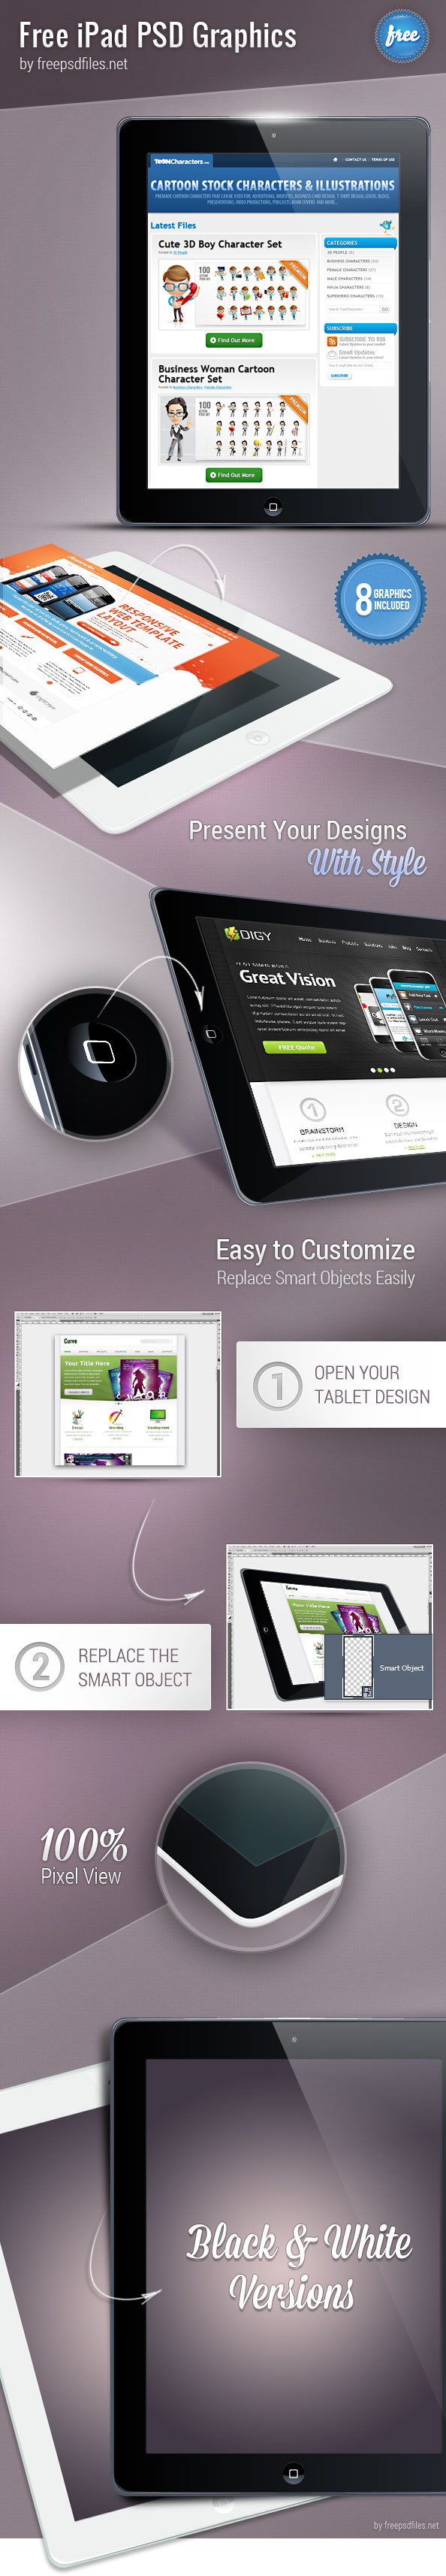 iPad PSD Graphics Preview